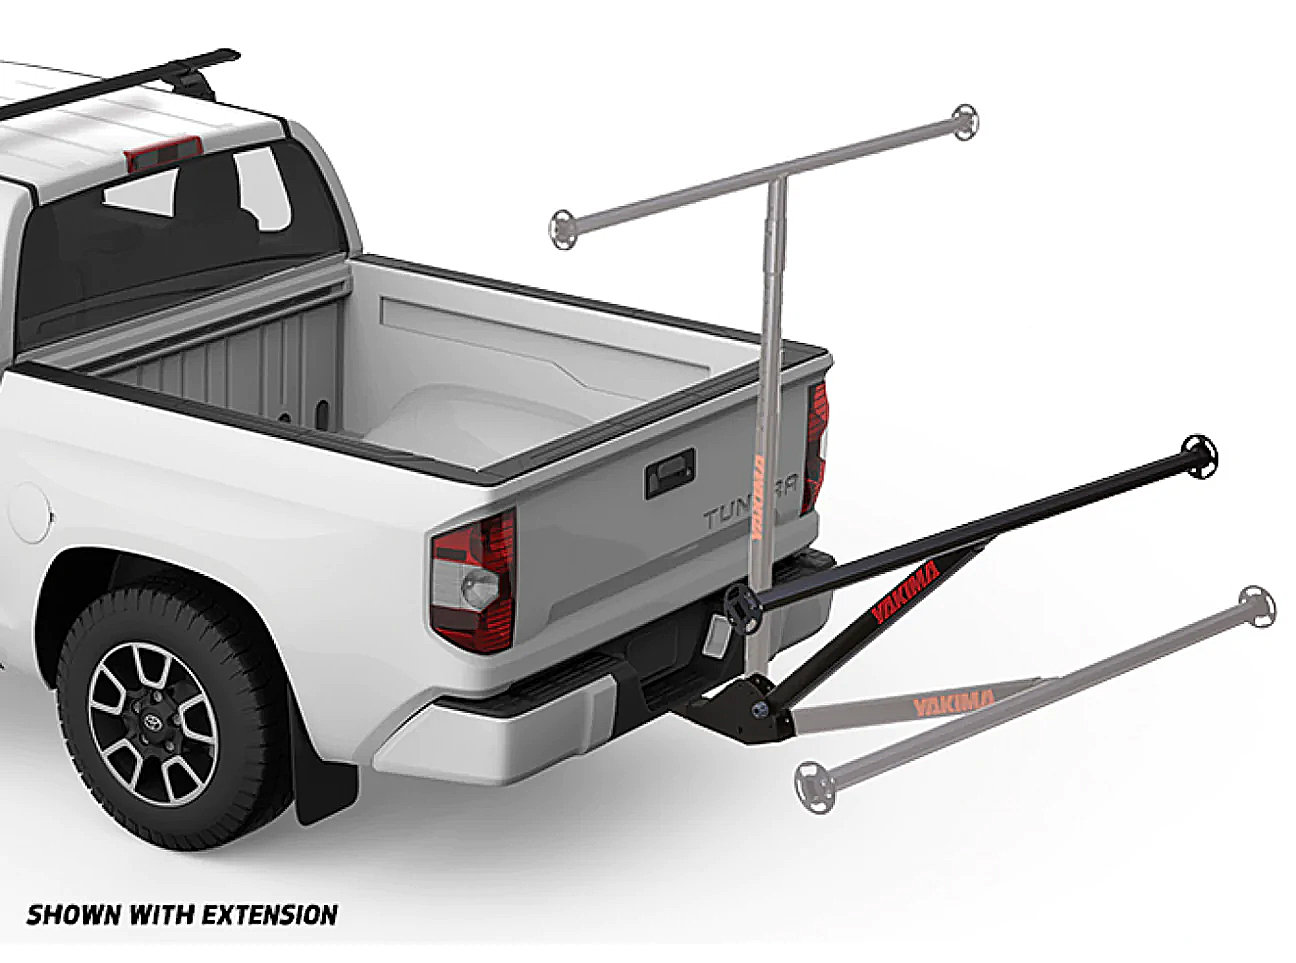 https://www.quadratec.com/sites/default/files/styles/product_zoomed/public/product_images/yakima-longarm-truck-bed-extender-8001149-installed-different-angle-options.jpg